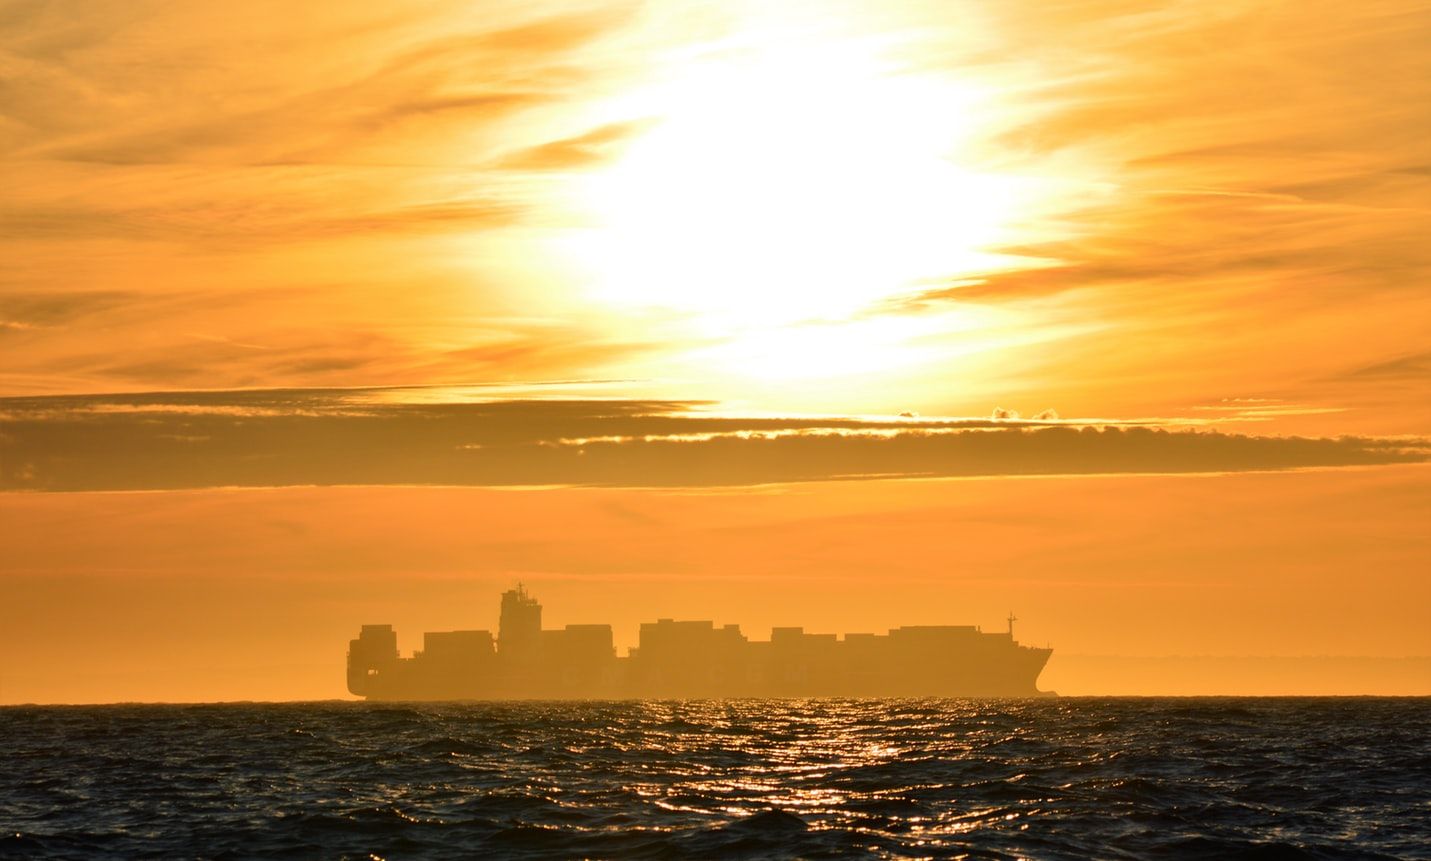 Container ship at sea at sunset